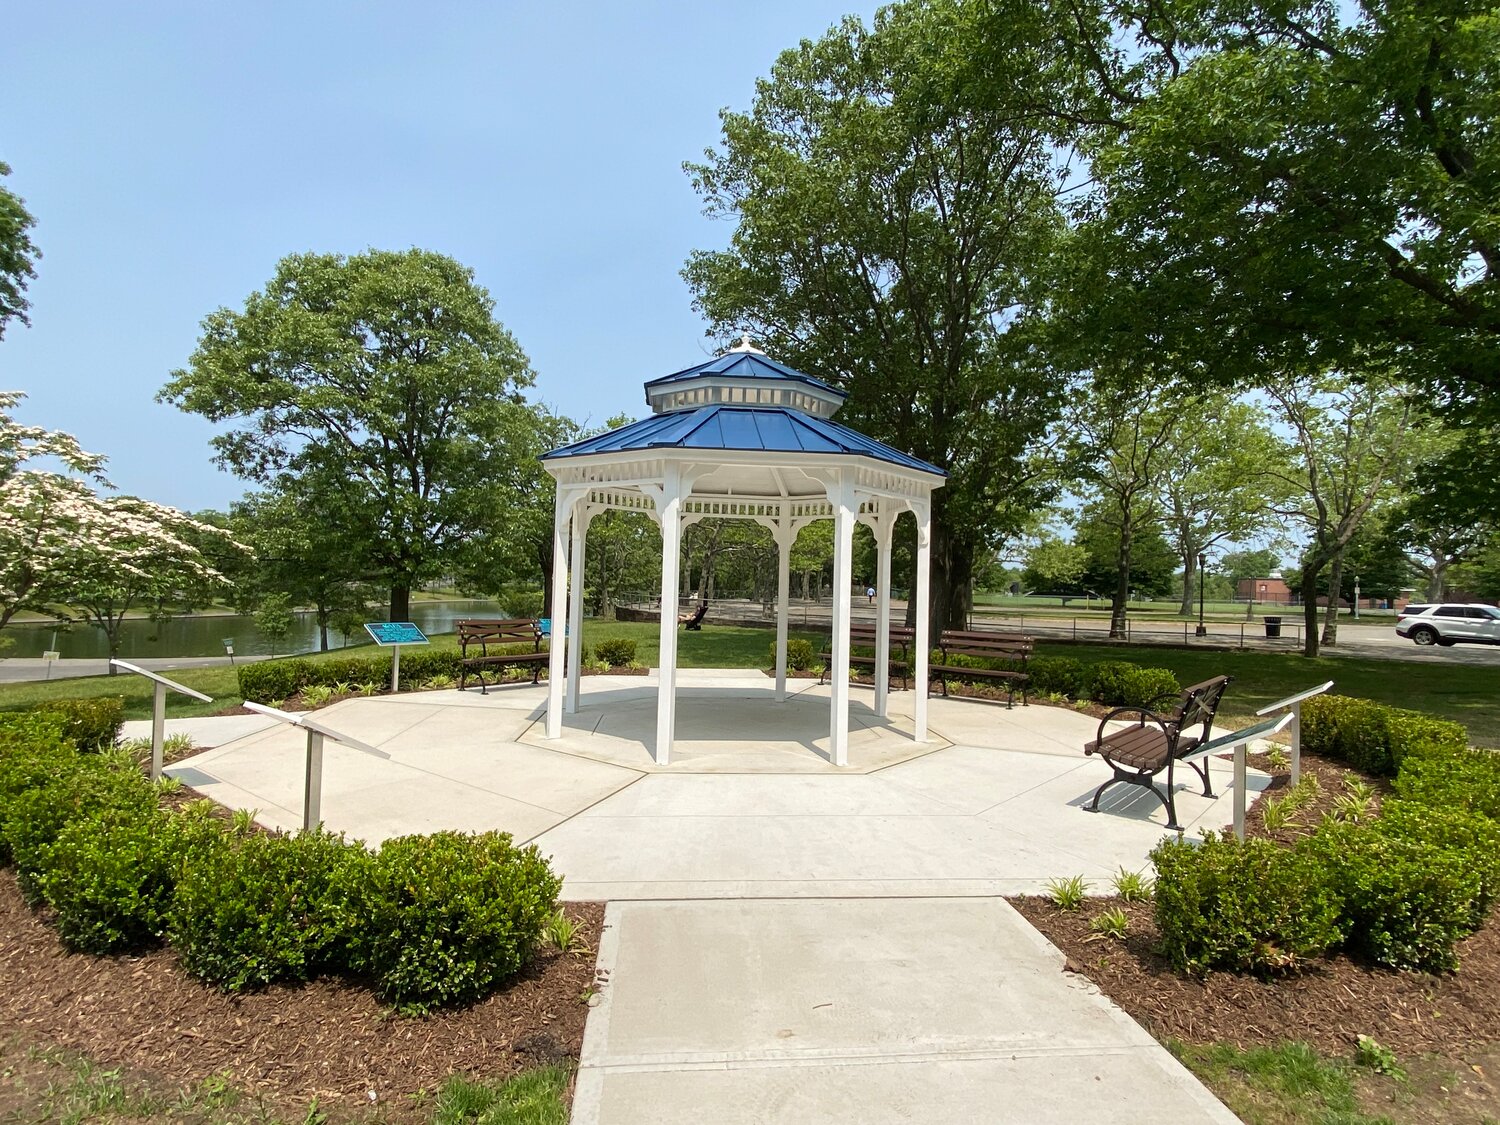 The new respite care relief park features educational information about Alzheimer’s disease, along with benches, a brick walkway, a gazebo and nice greenery.